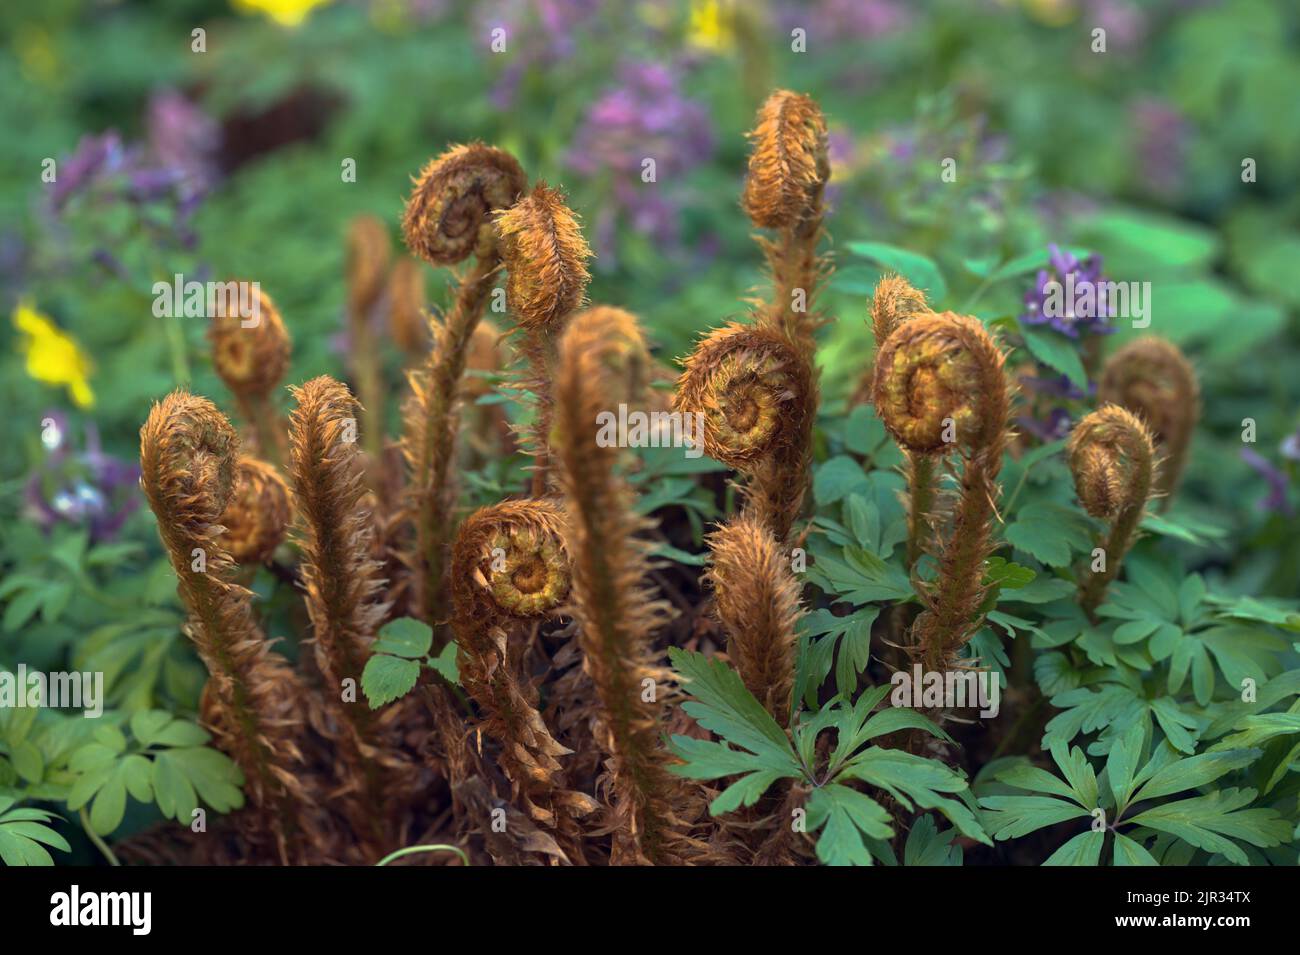 New fern fronds in a garden Stock Photo